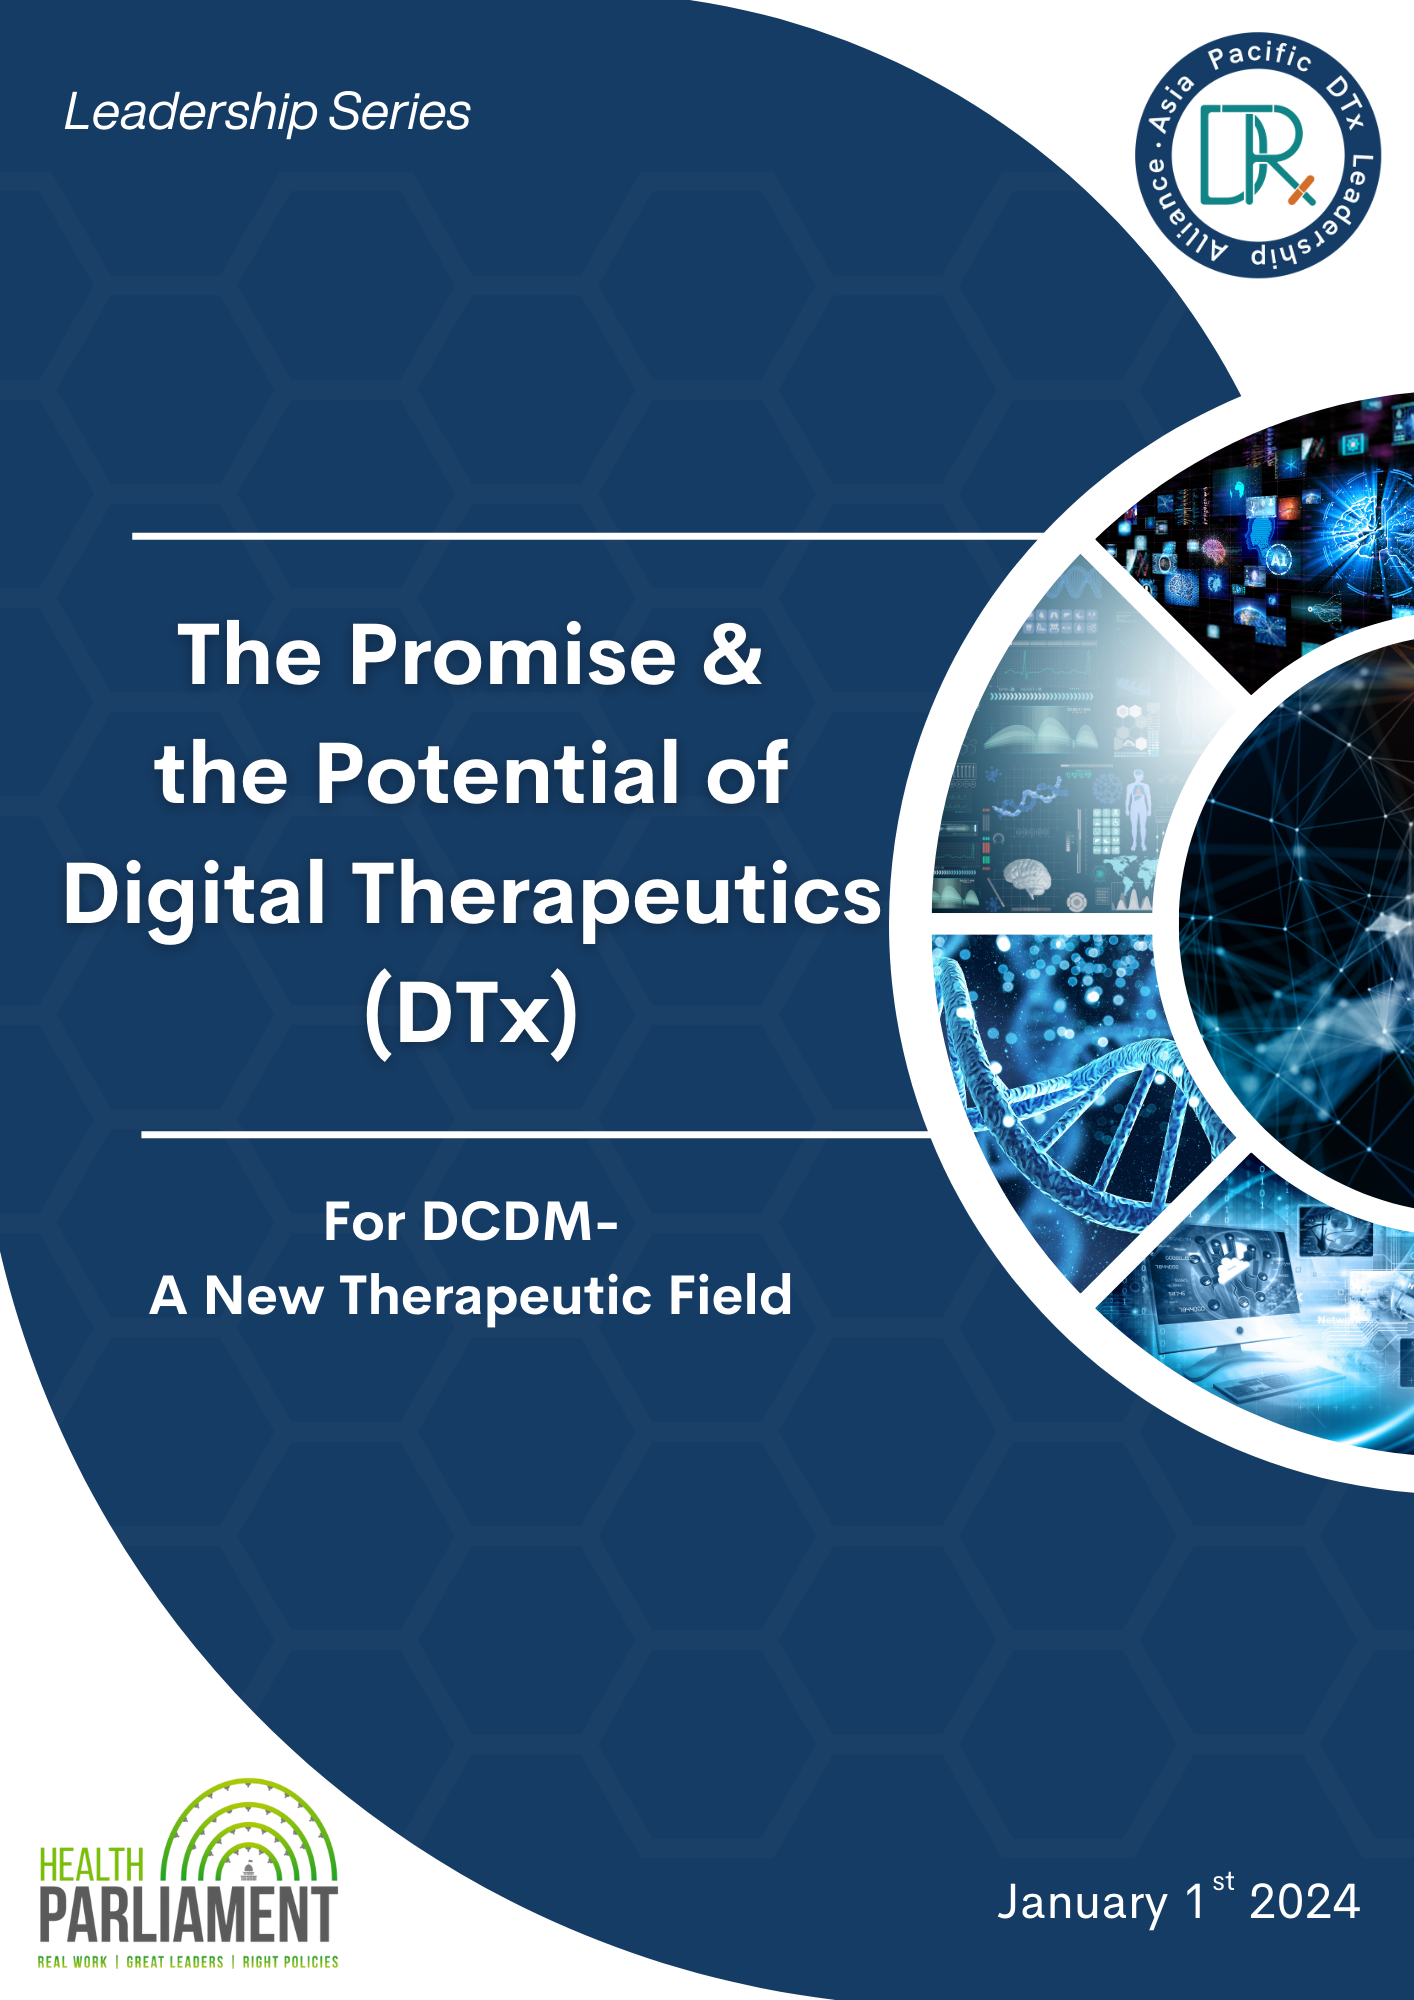 The Promise and The Potential of Digital Therapeutics (DTx) for DCDM- A New Therapeutic Field